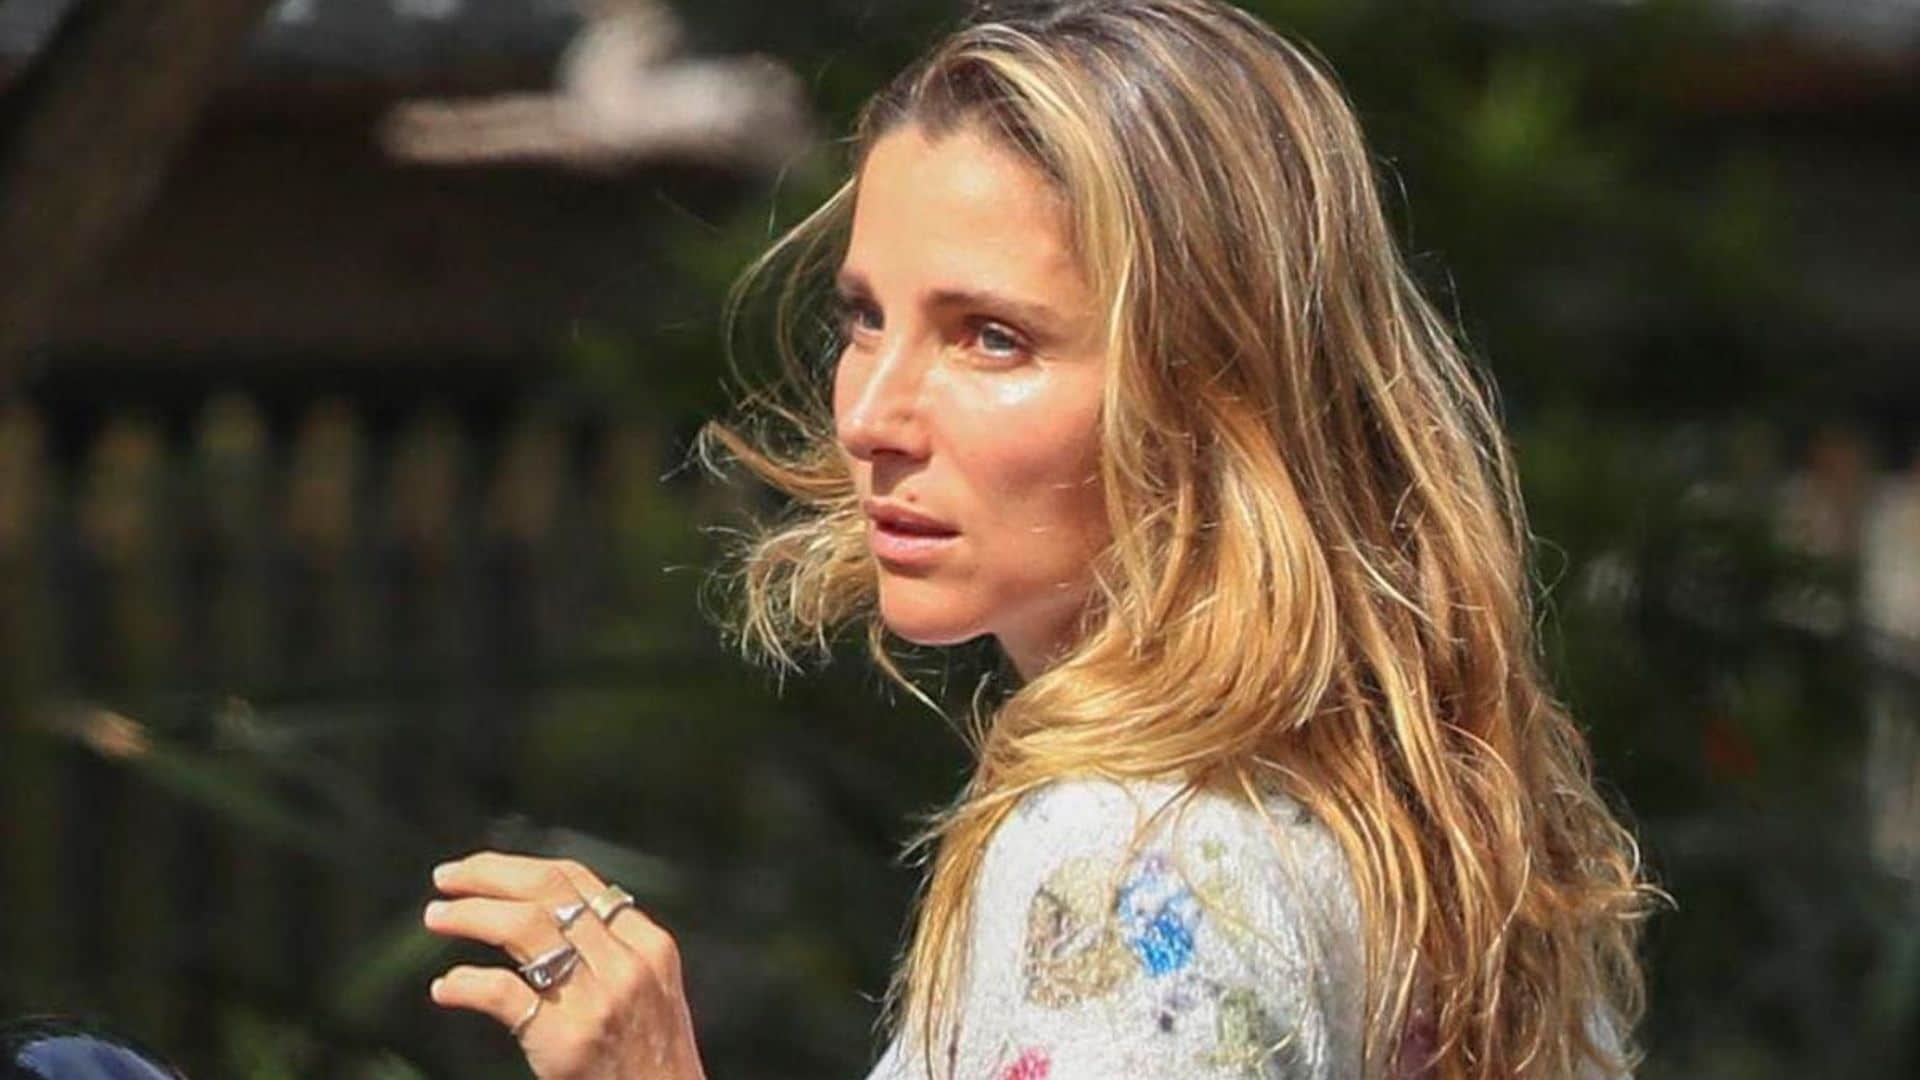 Elsa Pataky goes on a drive with her adorable dog